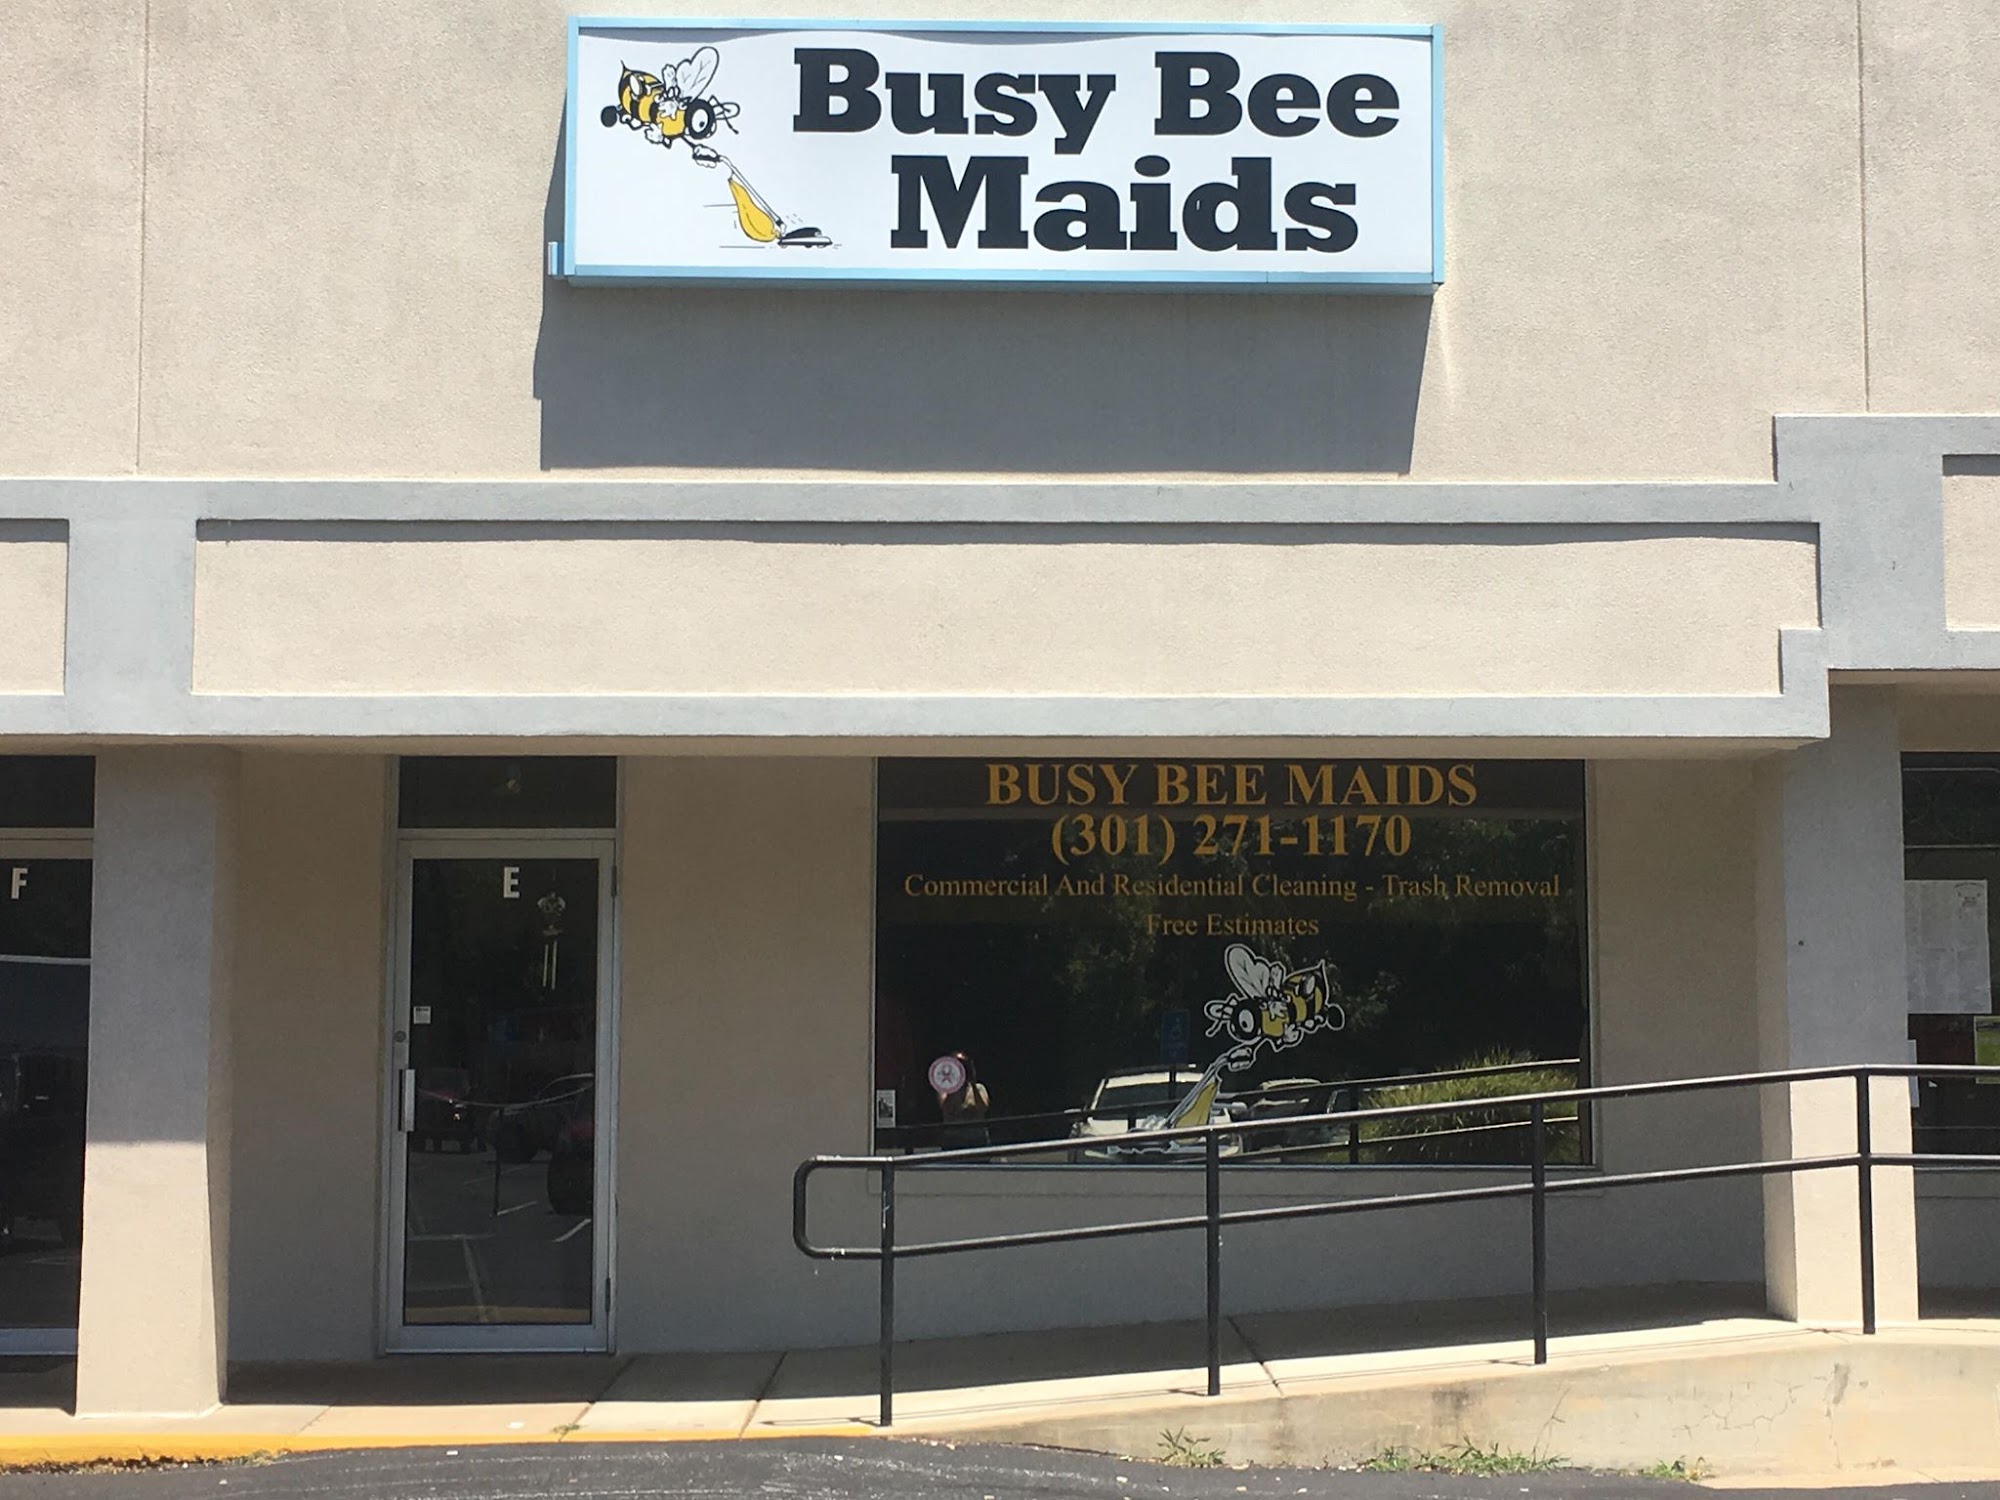 Busy Bees Maid Service 121 E Main St, Thurmont Maryland 21788